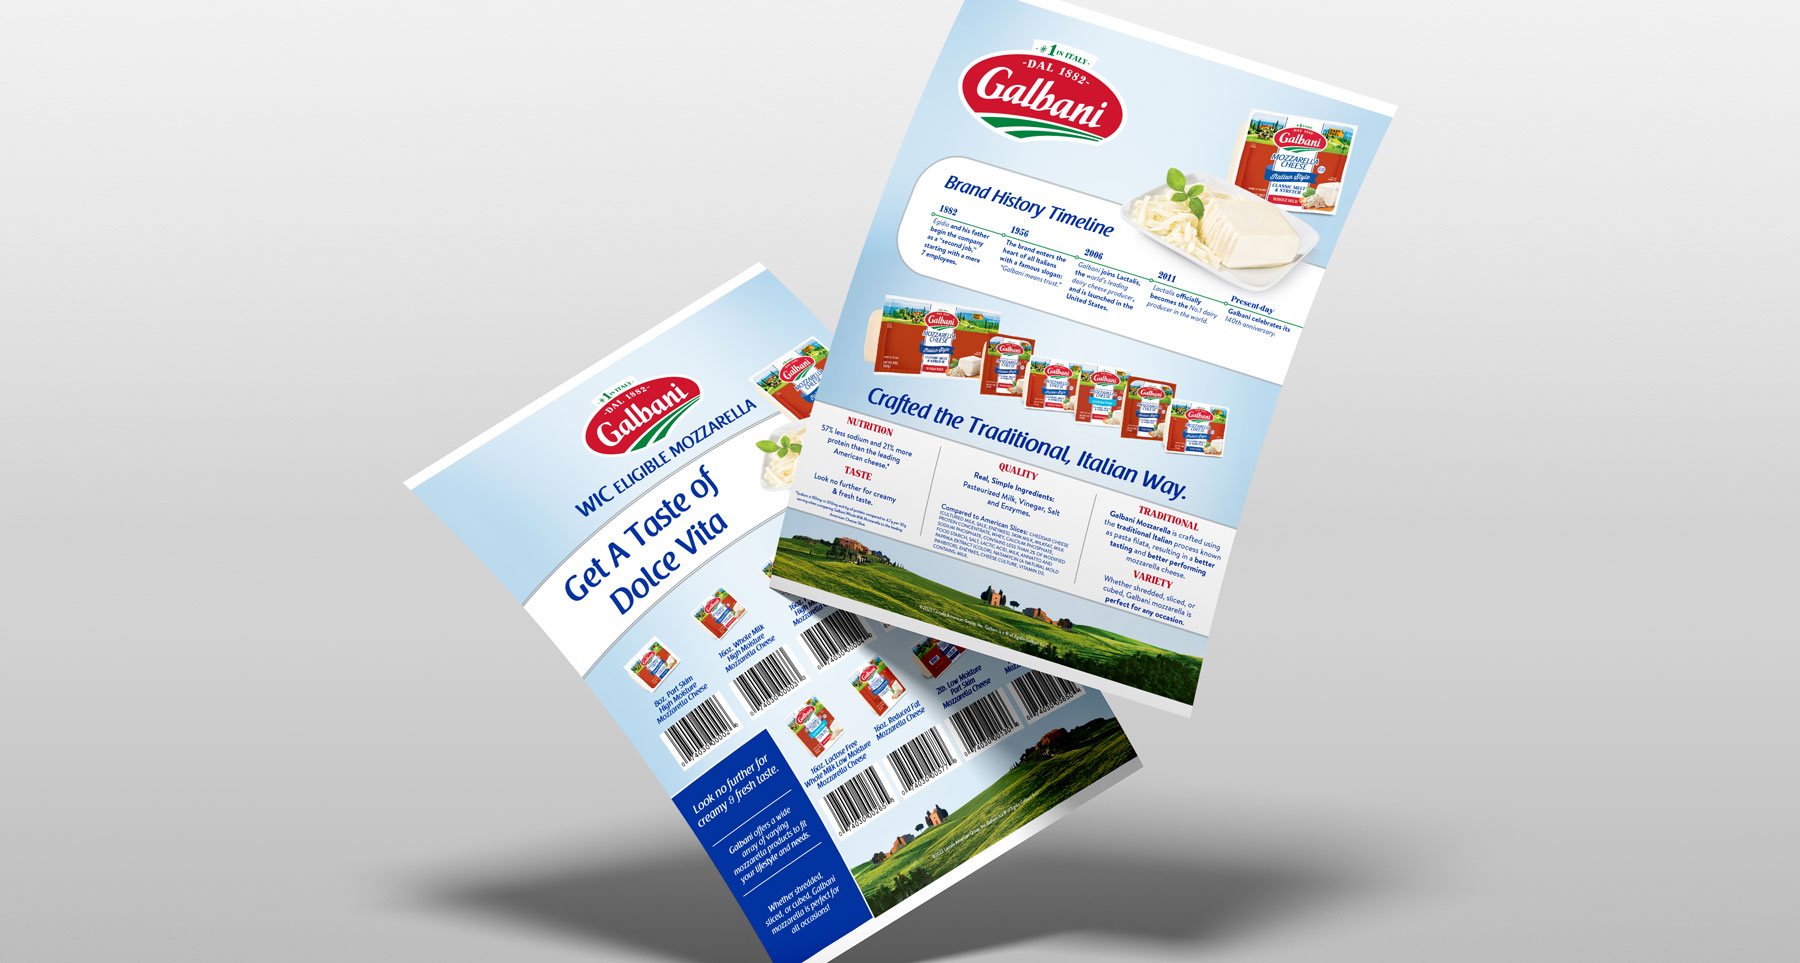 Galbani print sheets featuring various cheese products